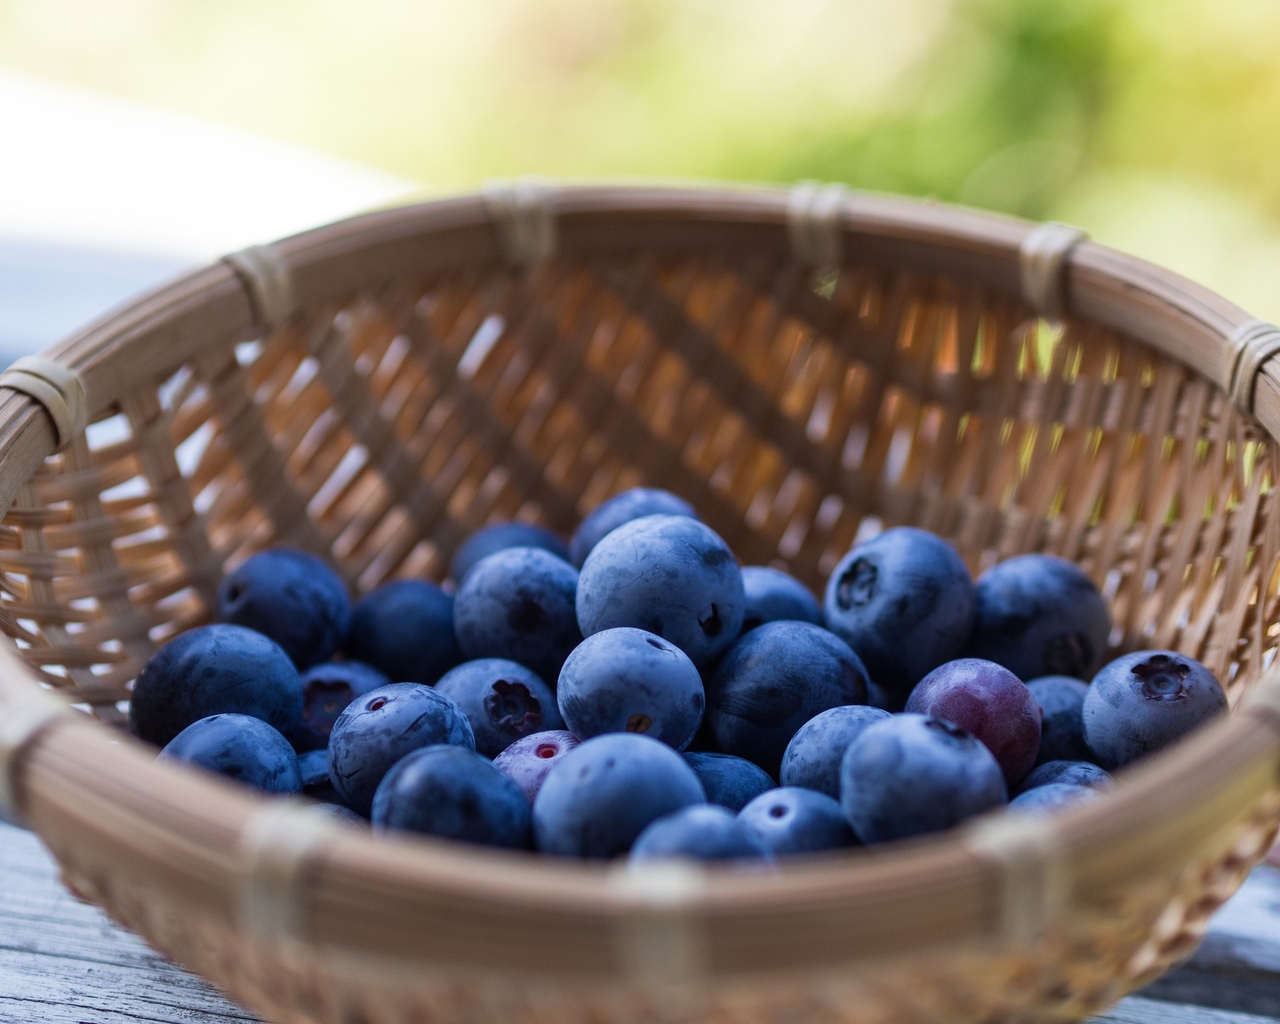 Basket of Blueberries for 1280 x 1024 resolution